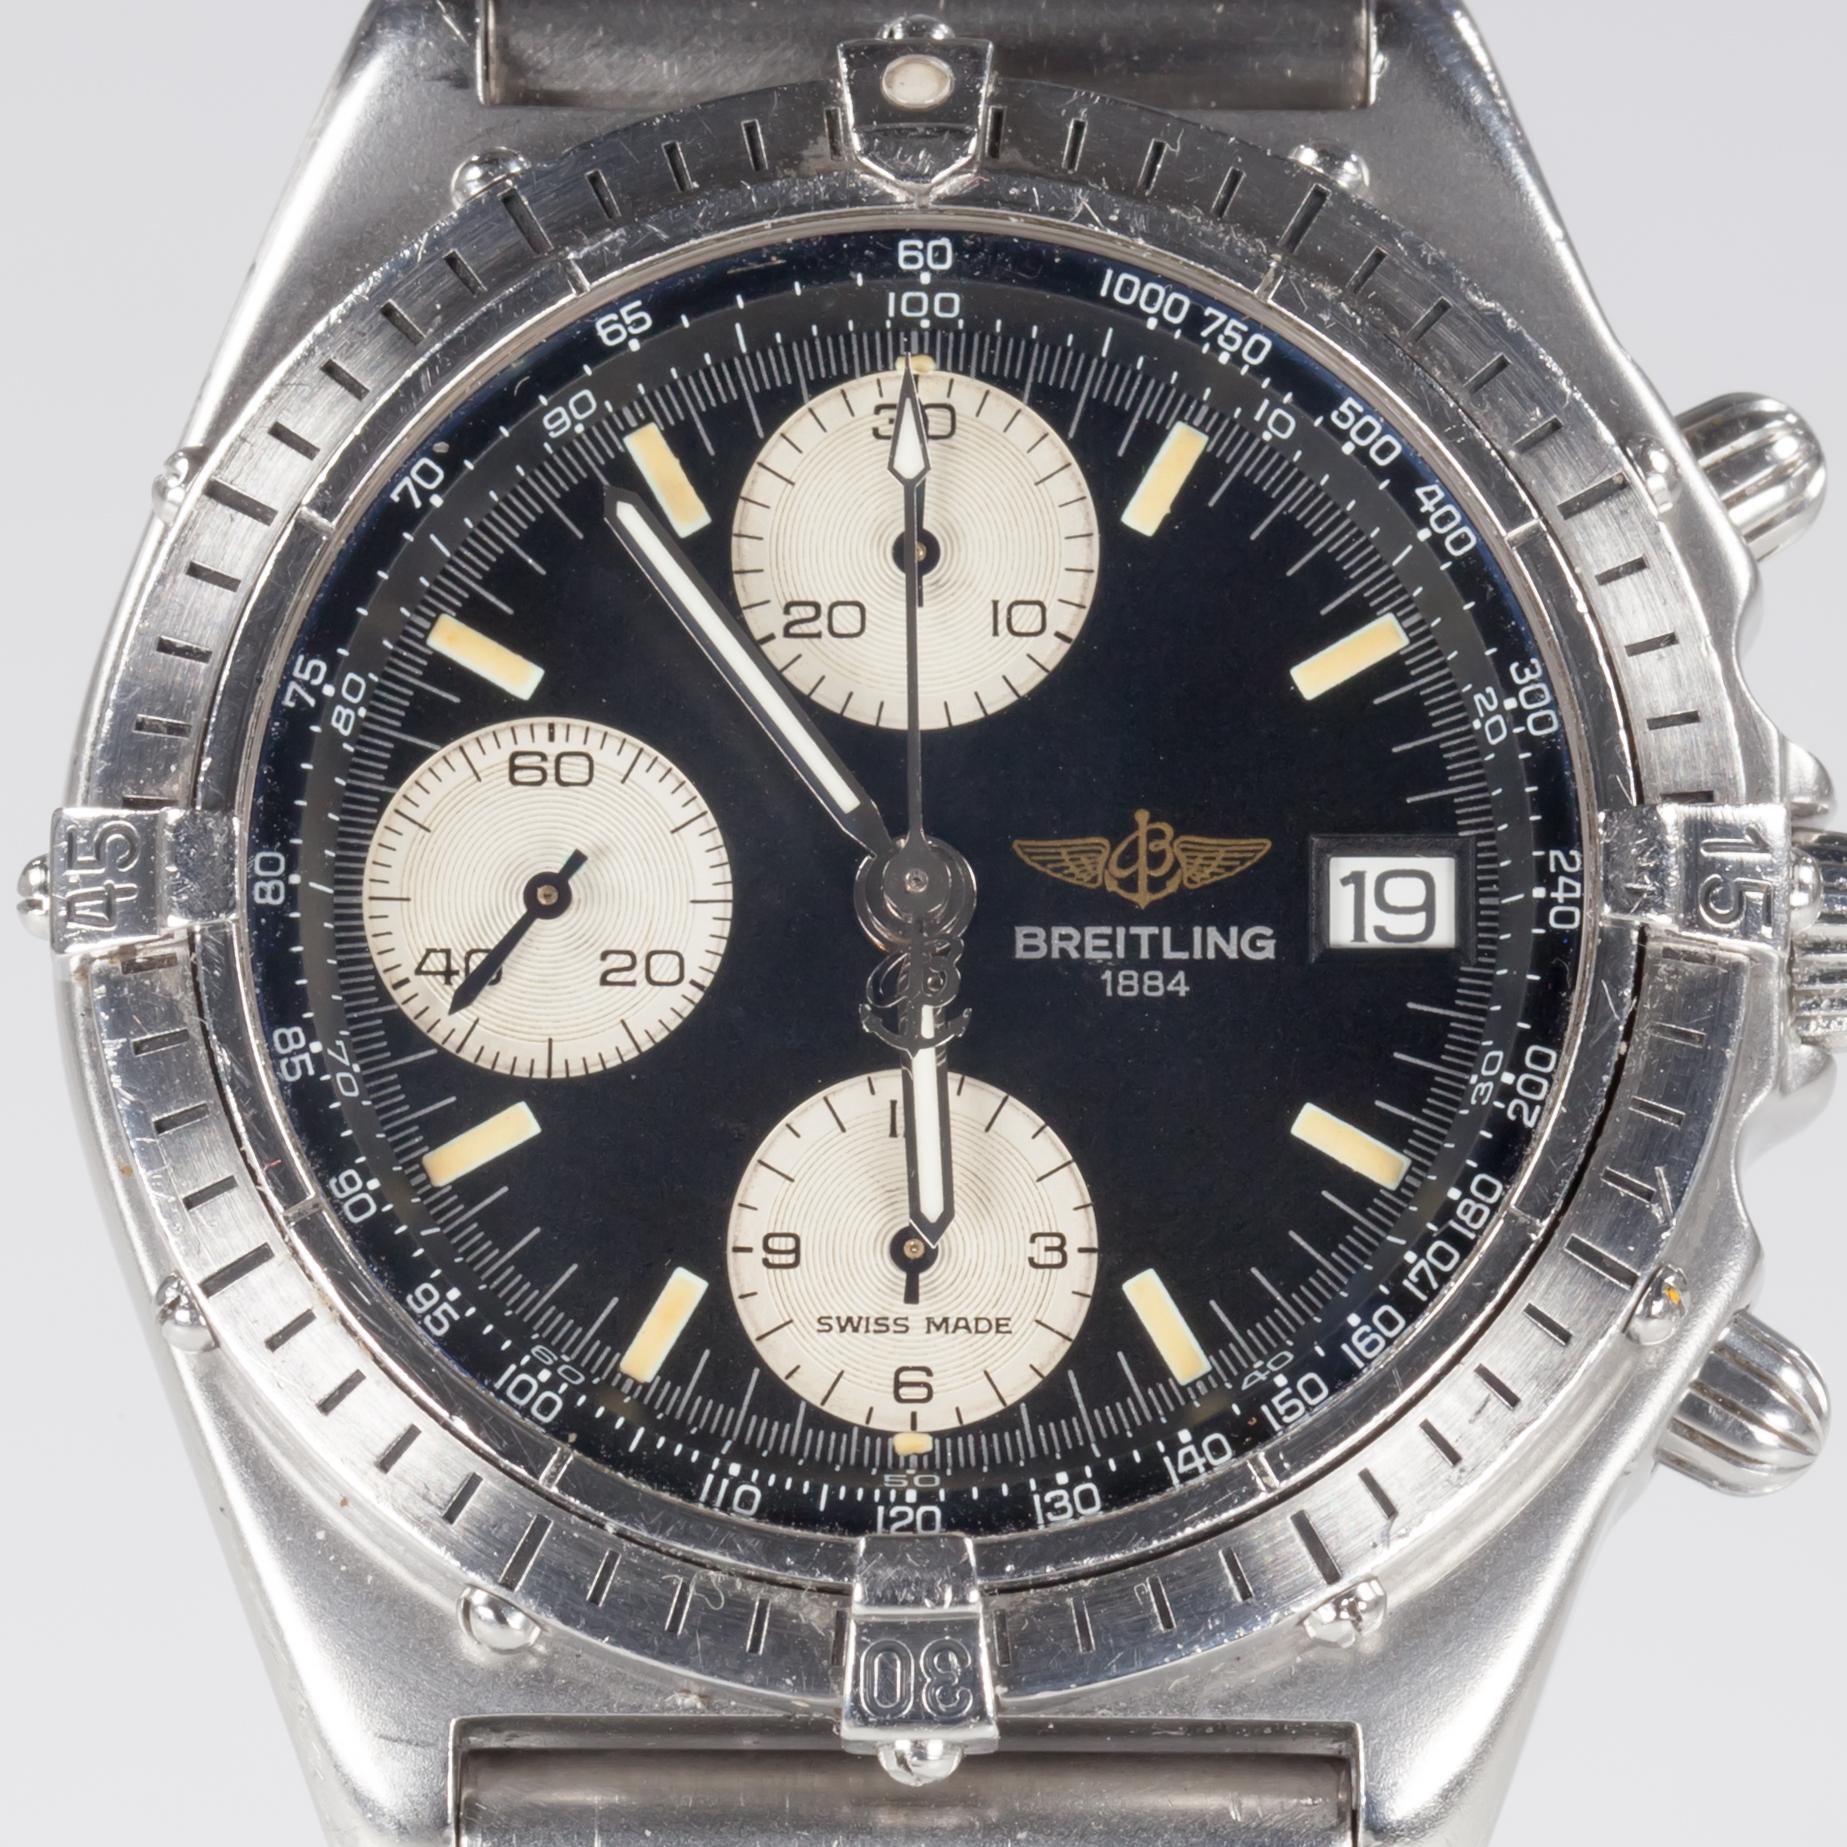 Breitling Men's Chronomat Automatic Stainless Steel Watch w/ Bracelet 81950

Model #81950
Movement #7750
1990's

Stainless Steel Case w/ Rotating Bezel (Luminous Mark at Noon)
38 mm in Diameter (42 mm w/ Crown)
Lug-to-Lug Width = 20 mm
Lug-to-Lug